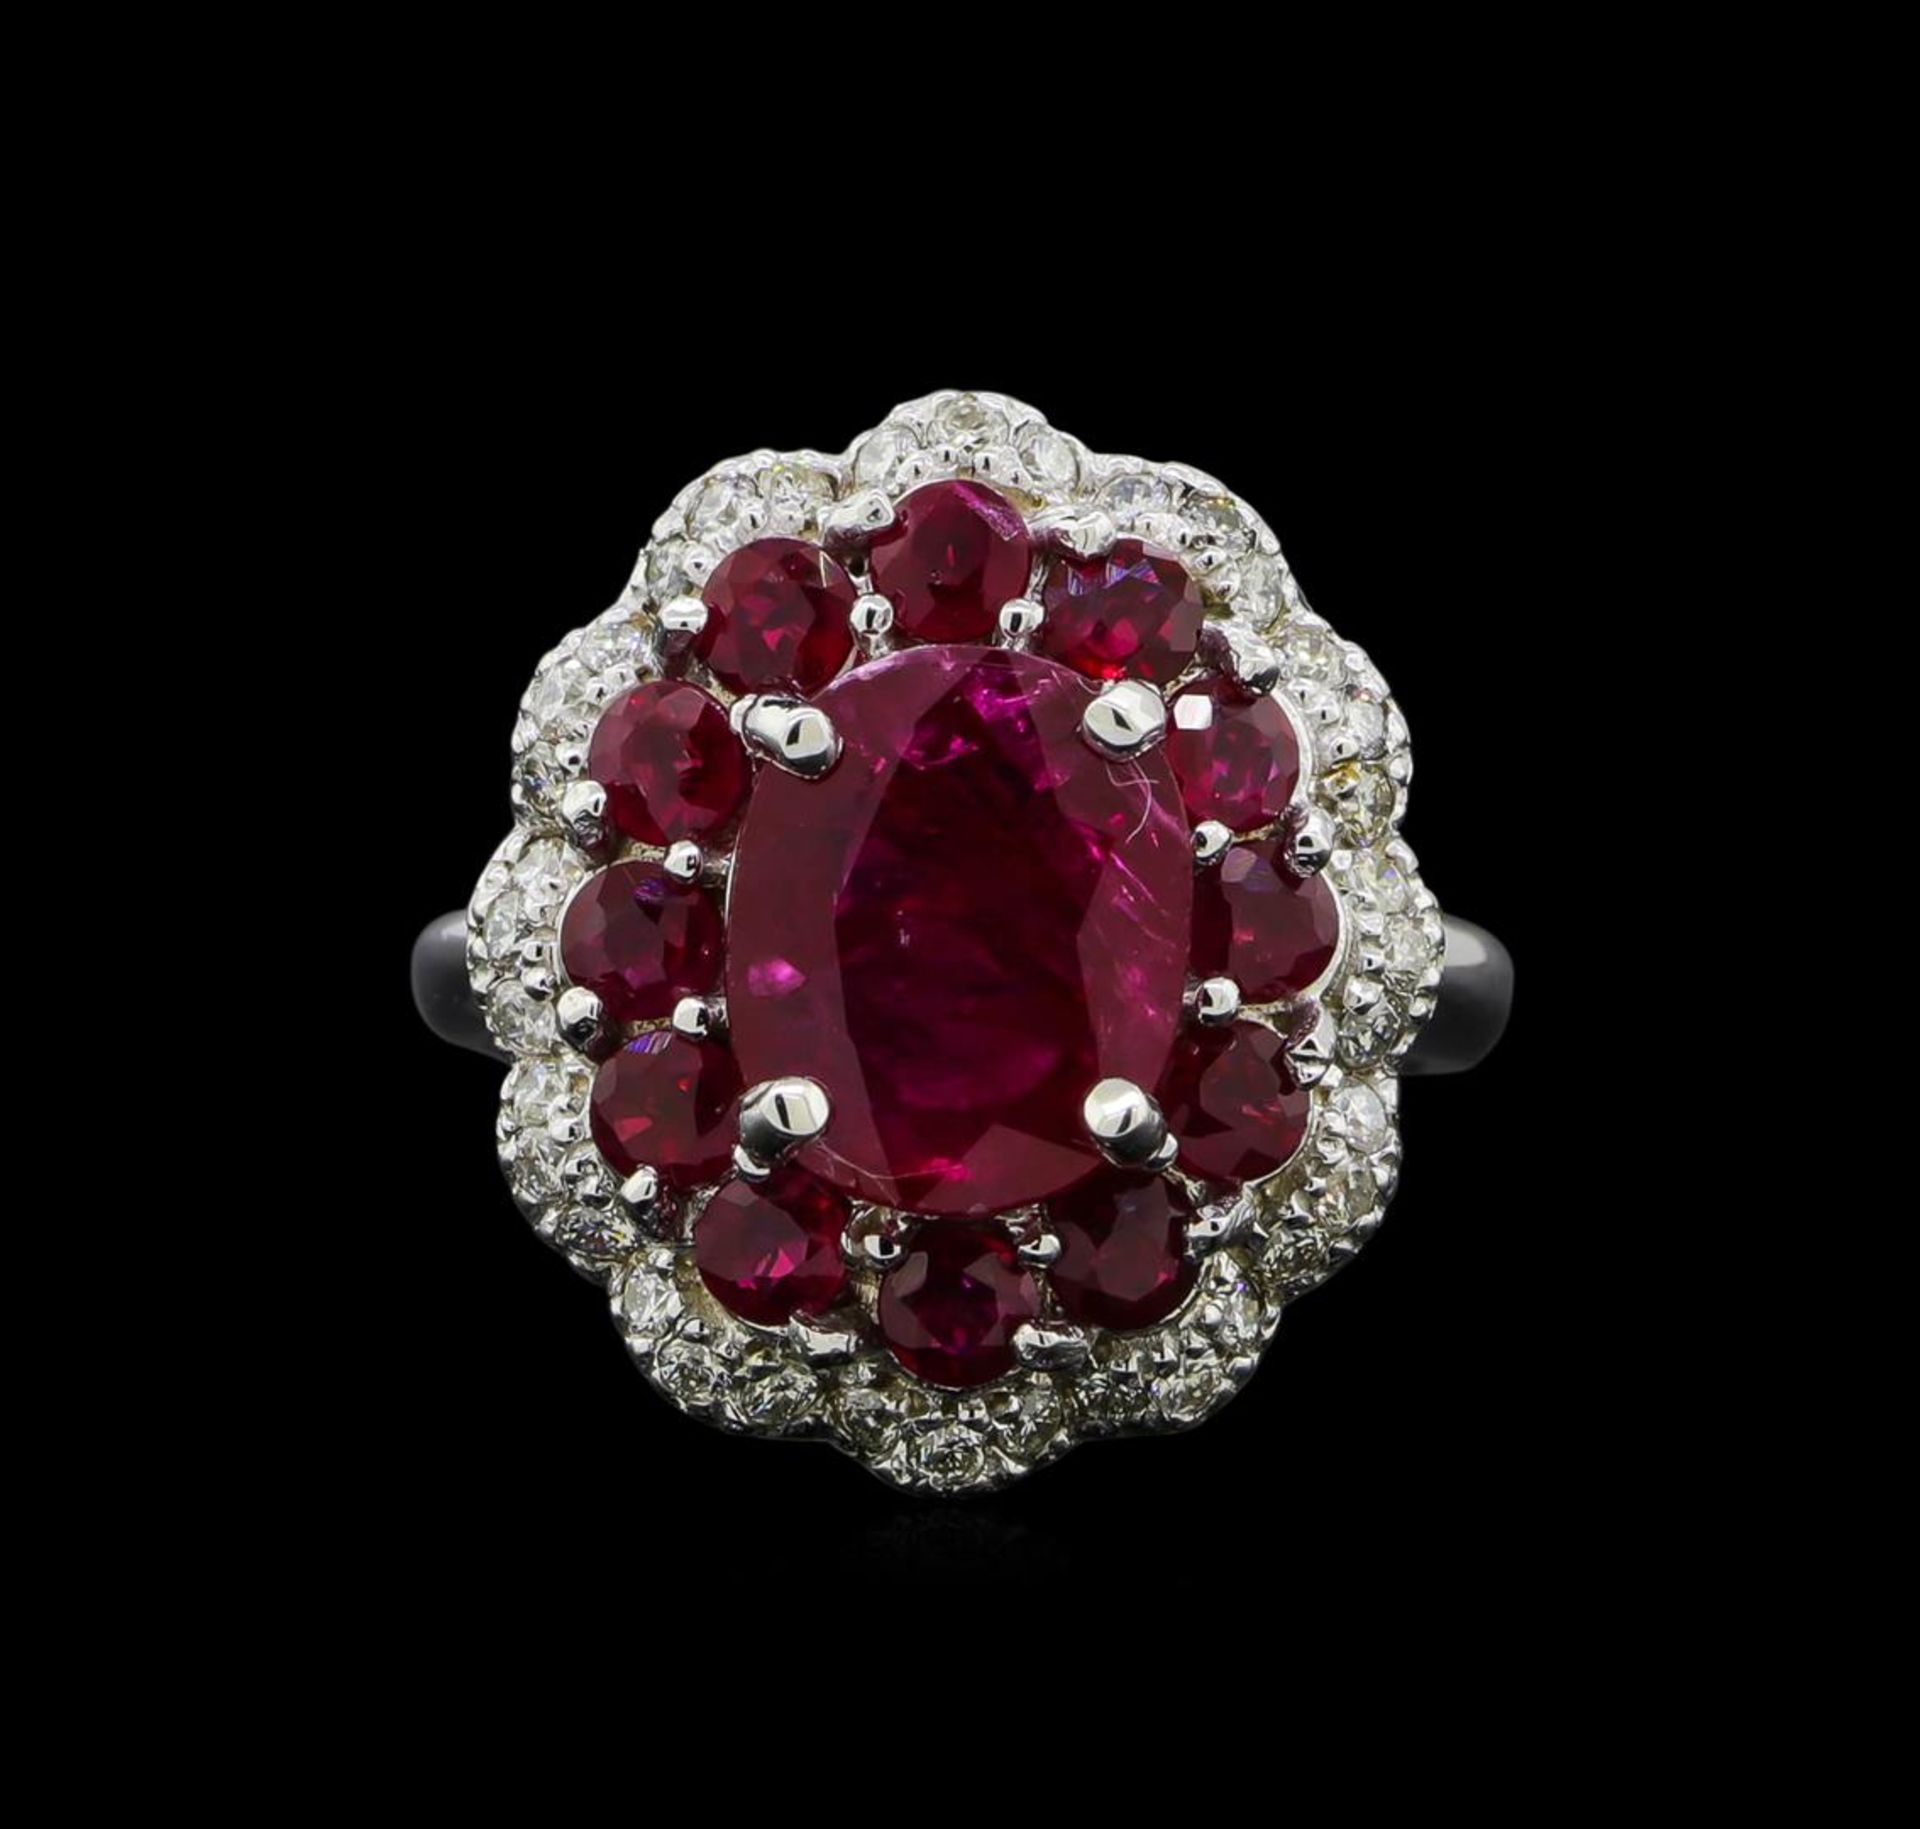 GIA Cert 4.54 ctw Ruby and Diamond Ring - 14KT White Gold - Image 2 of 6